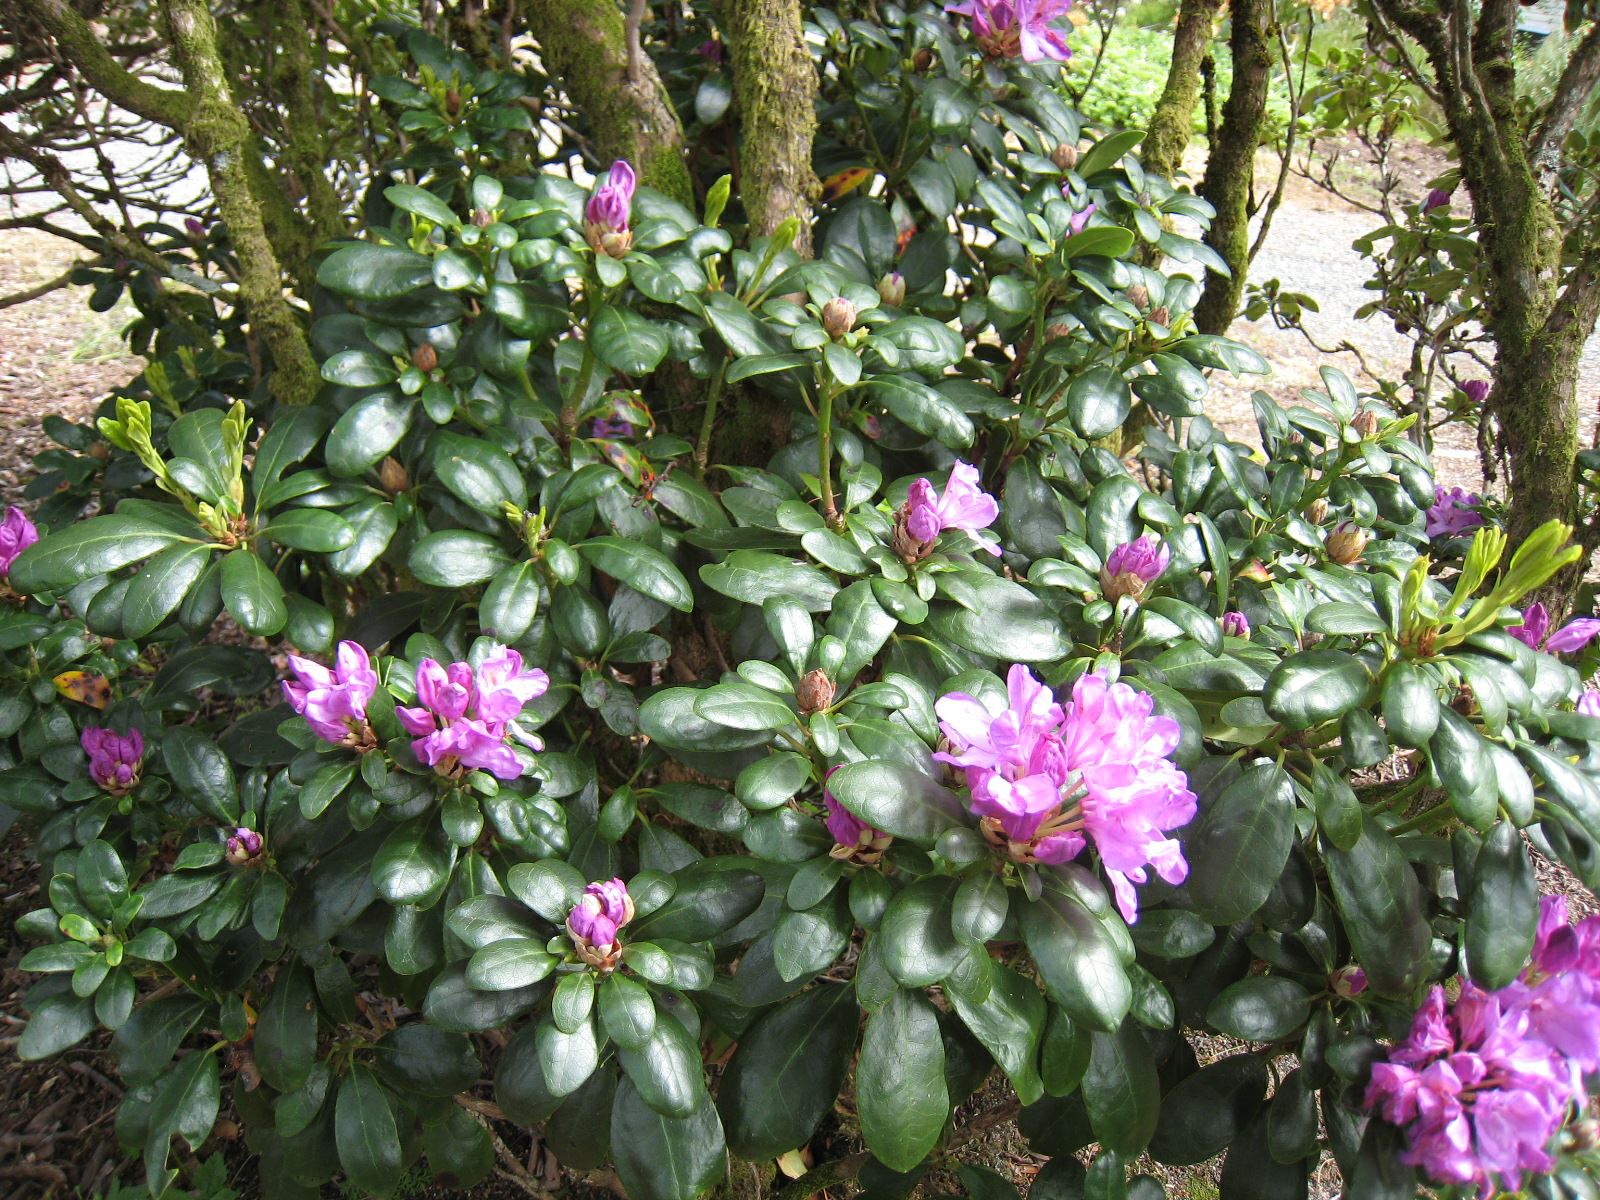 Rhododendron 'Daphnoides'